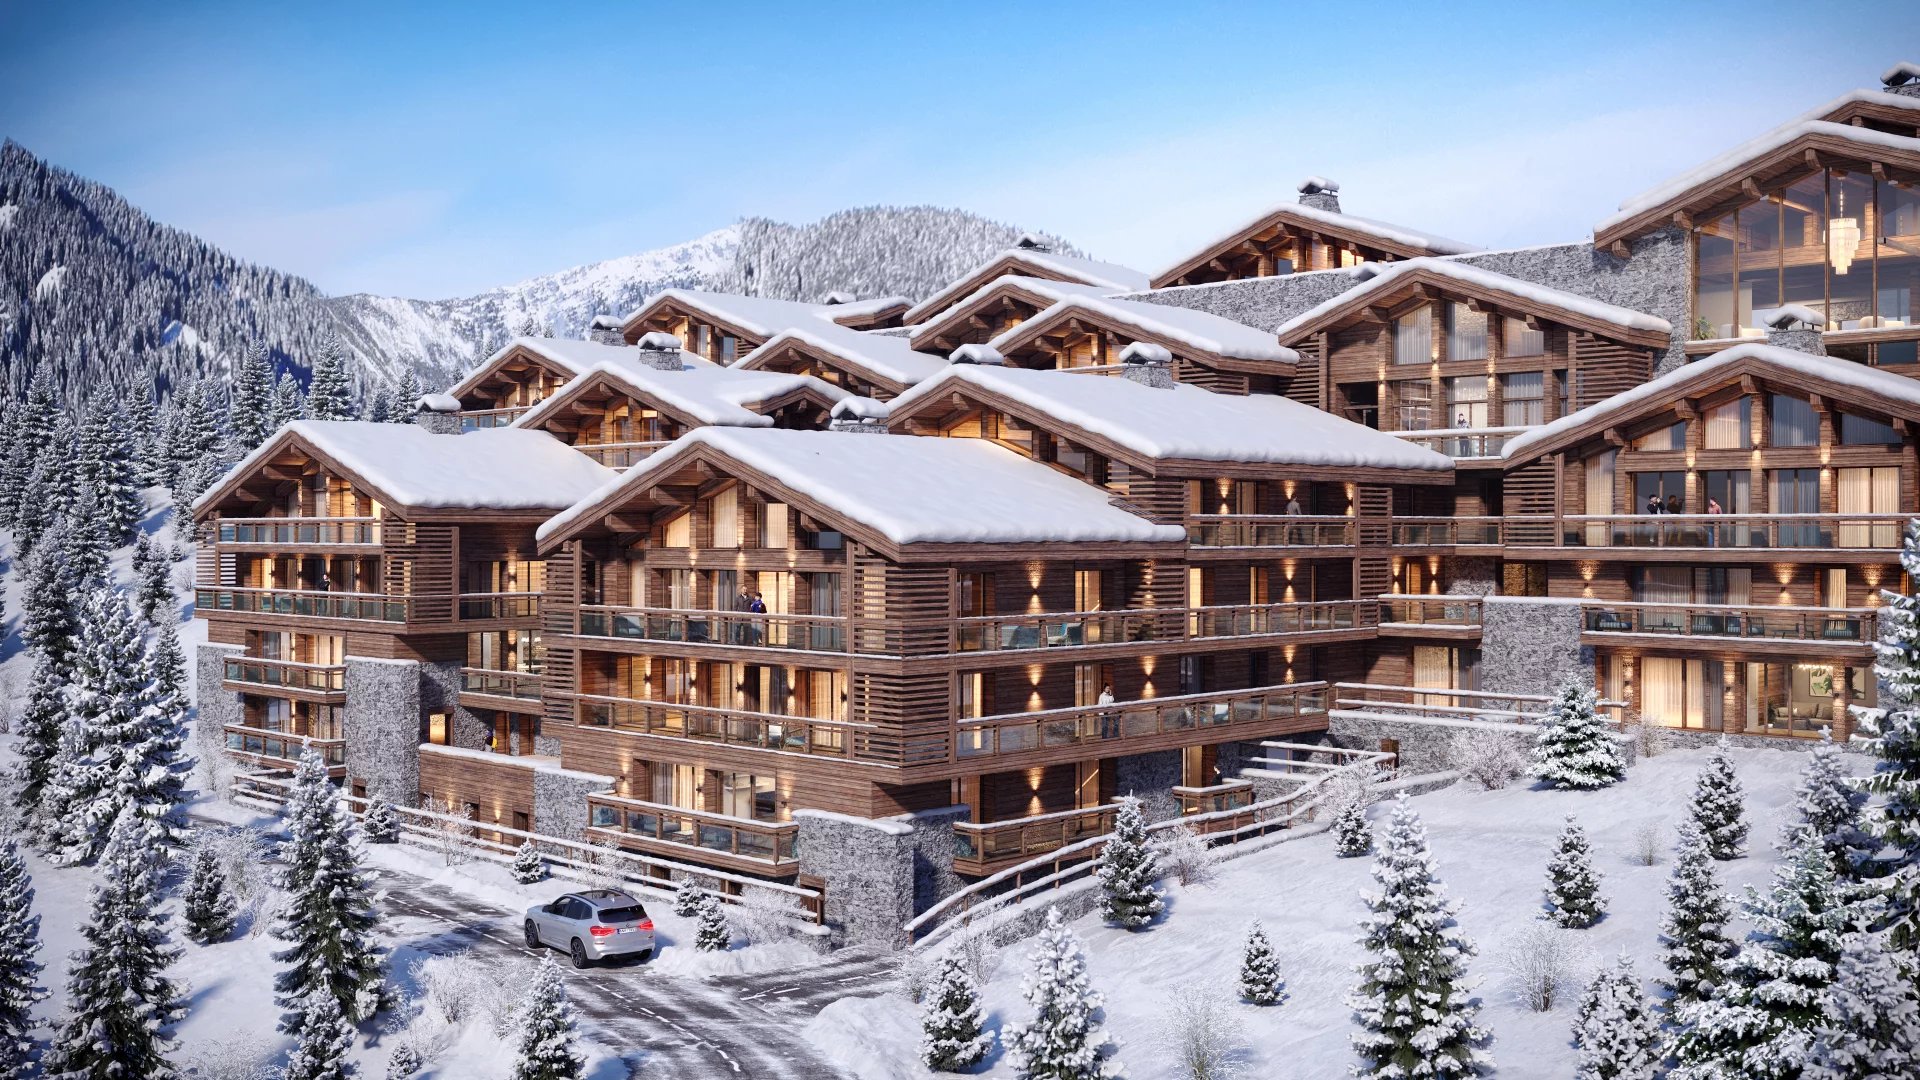 Grand Luxe 5 Bedrooms + cabin appartment + Outdoor SPA / Investor Profile